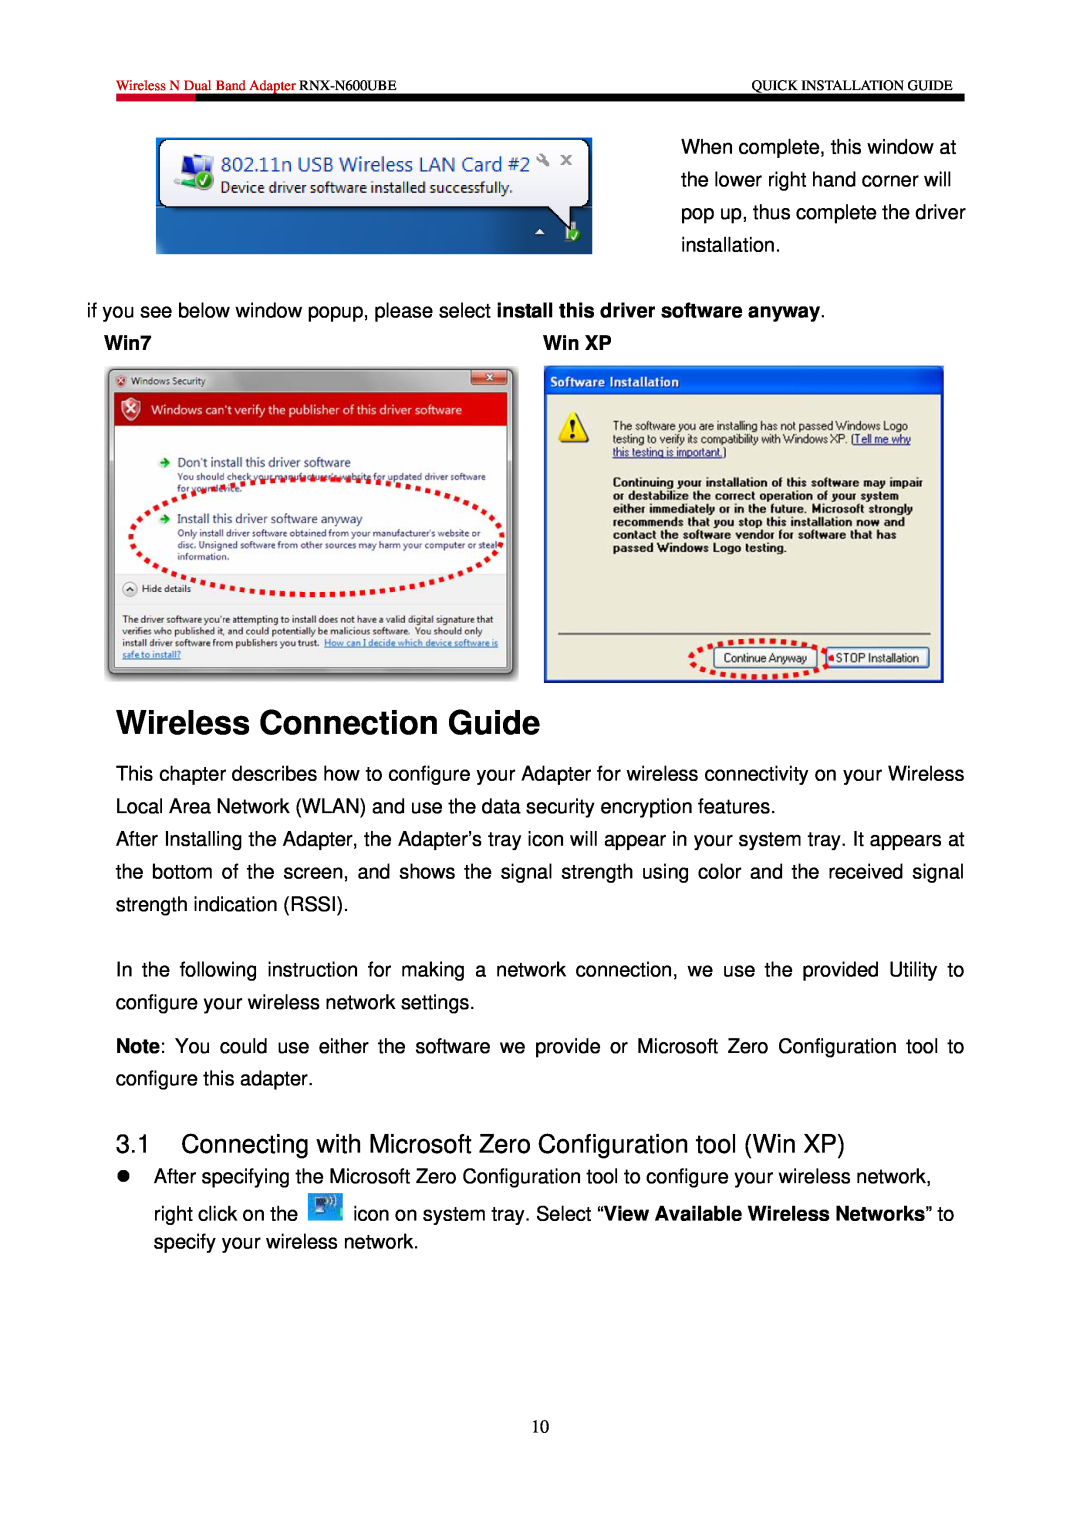 Rosewill RNX-N600UBE user manual Wireless Connection Guide, Connecting with Microsoft Zero Configuration tool Win XP, Win7 